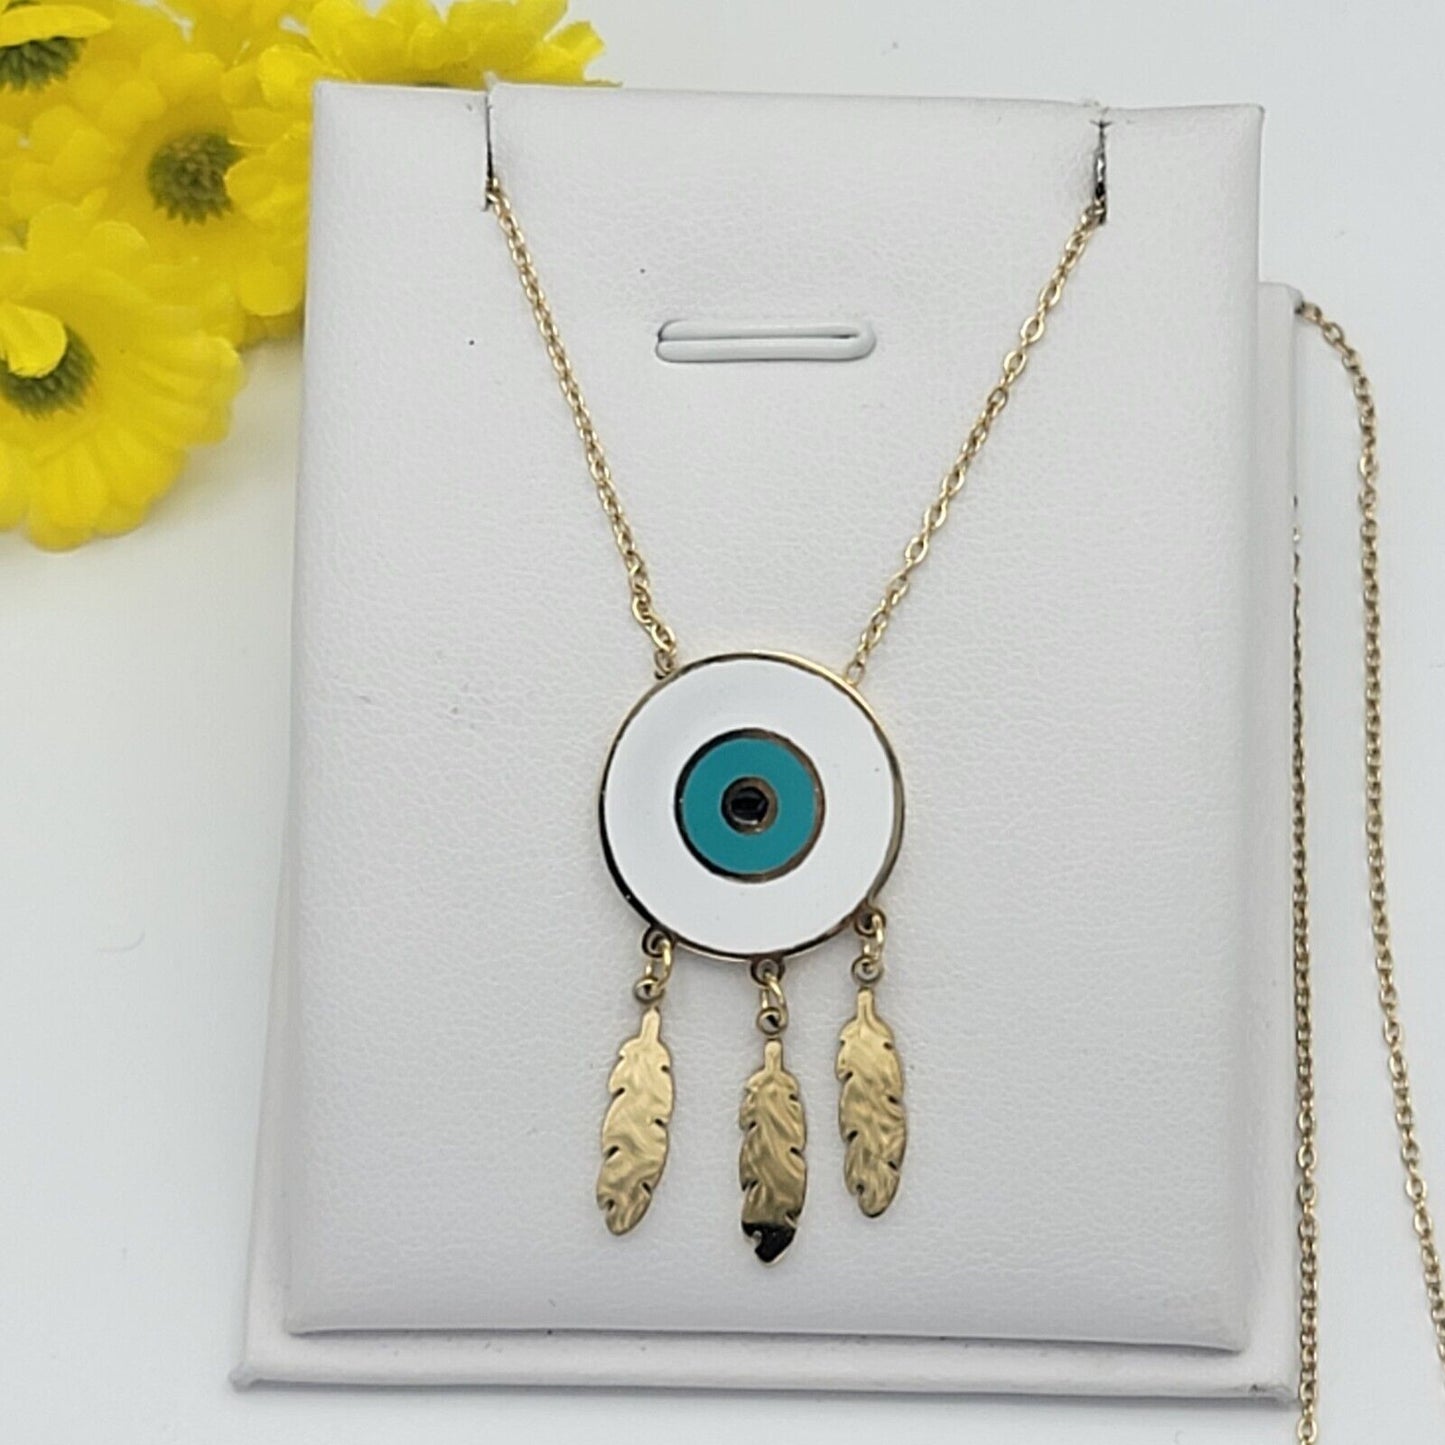 Necklaces - Stainless Steel Gold Plated. Dream Catcher Feather Blue Eye